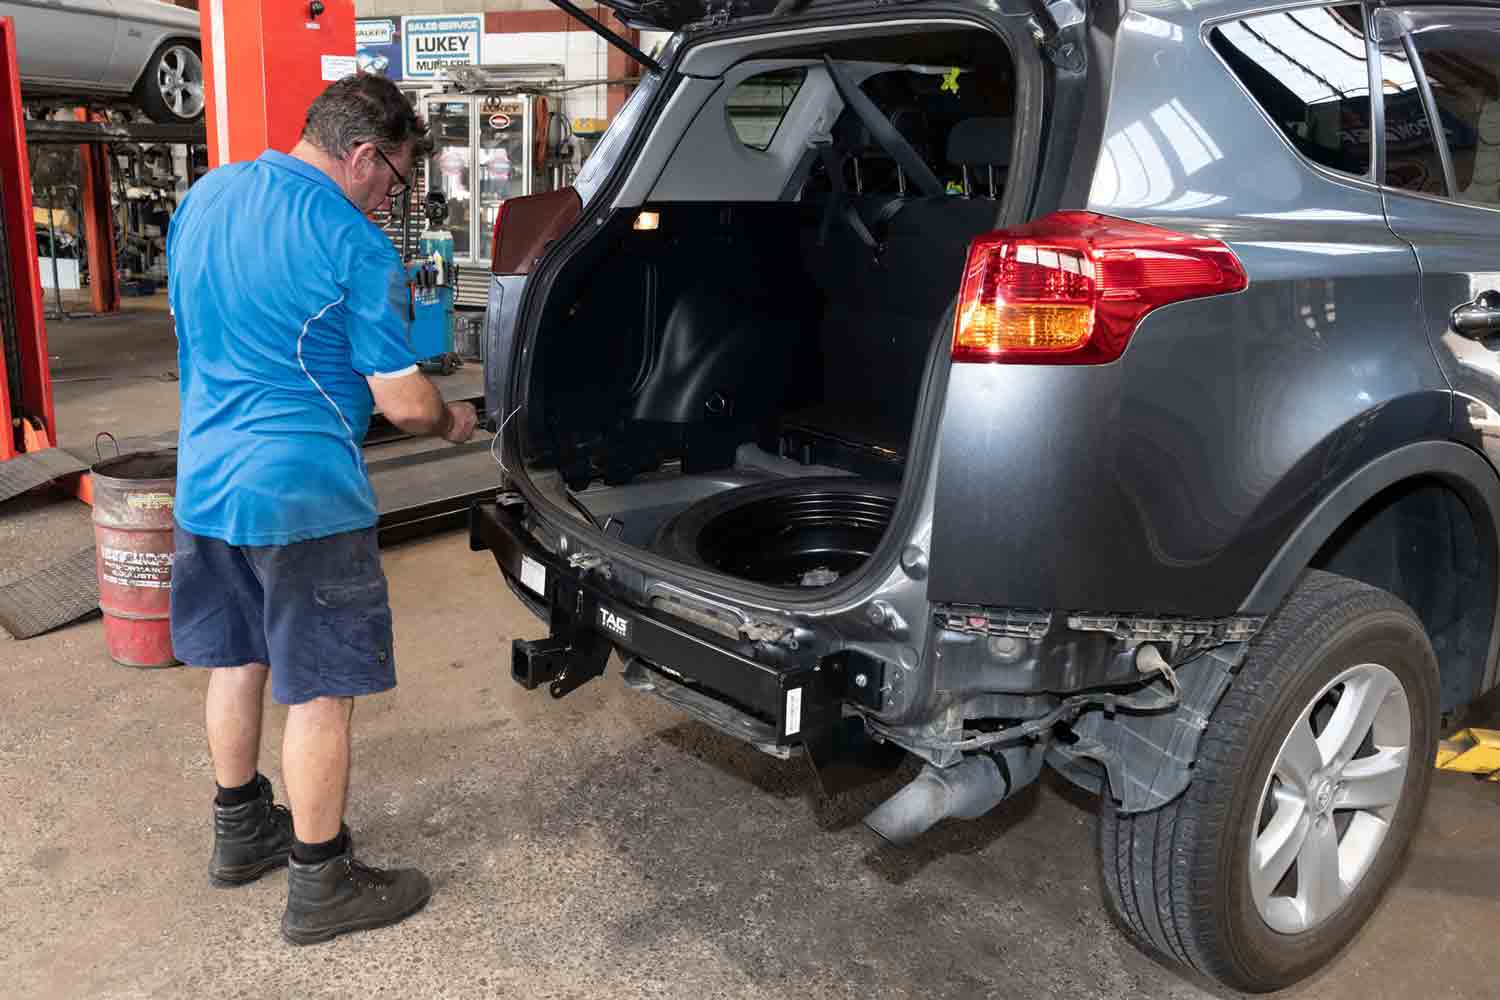 Towbar Being Installed on Car — Bob Parkes Automotive In Hyde Park, QLD